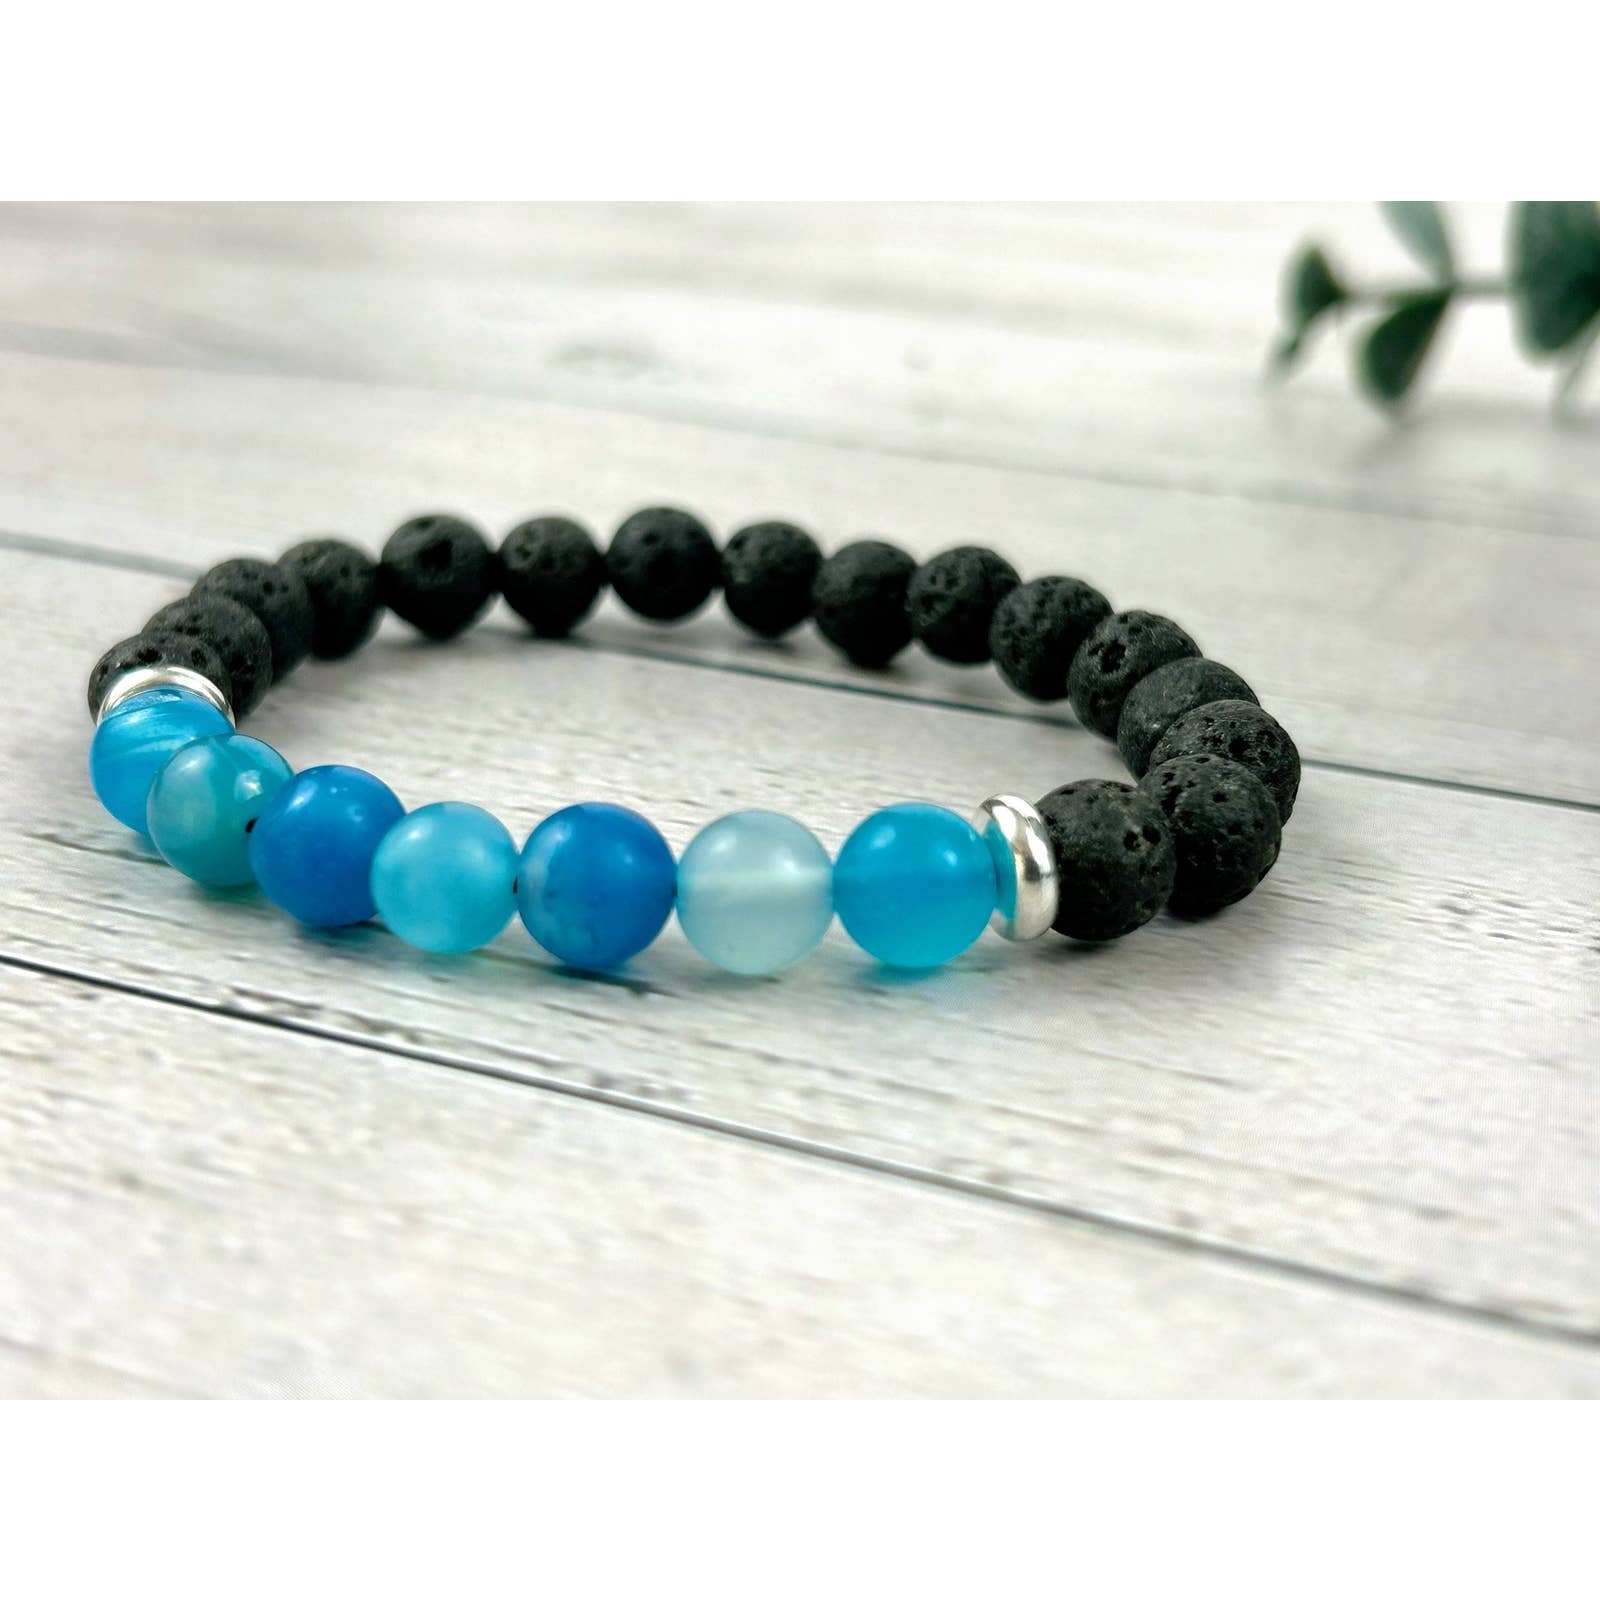 Essential Oil Bracelet - Aromatherapy Bracelet with Blue Striped Agate and Black Lava Beads